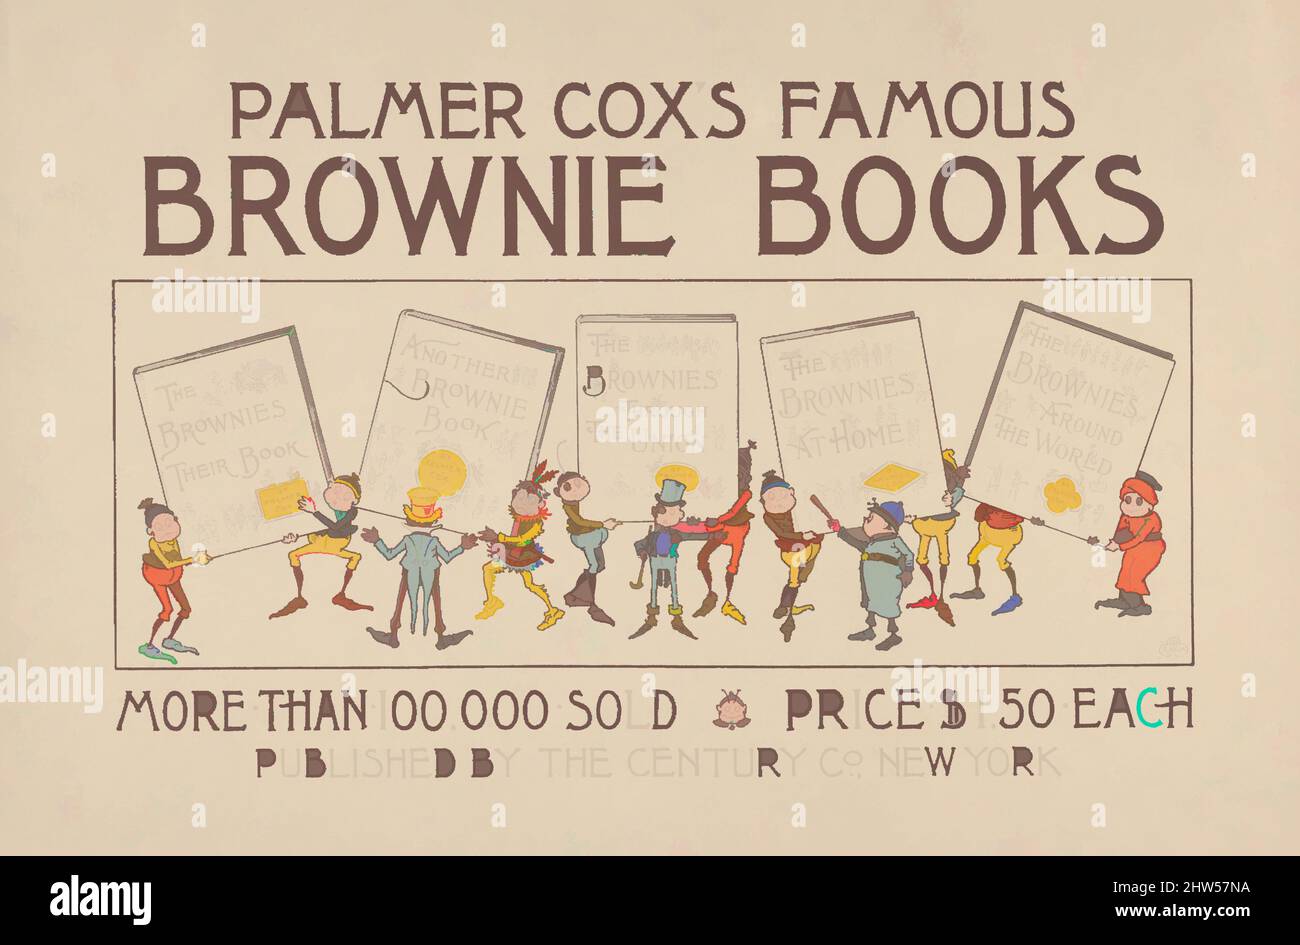 Art inspired by Palmer Cox's Famous Brownie Books, 1895, Commercial relief process, Sheet: 10 1/16 × 15 1/8 in. (25.6 × 38.4 cm), Palmer Cox (Canadian, Granby, Quebec 1840–1924 Granby, Quebec), George R. Halm (American, born Ogdensburg, New York, 1850, Classic works modernized by Artotop with a splash of modernity. Shapes, color and value, eye-catching visual impact on art. Emotions through freedom of artworks in a contemporary way. A timeless message pursuing a wildly creative new direction. Artists turning to the digital medium and creating the Artotop NFT Stock Photo